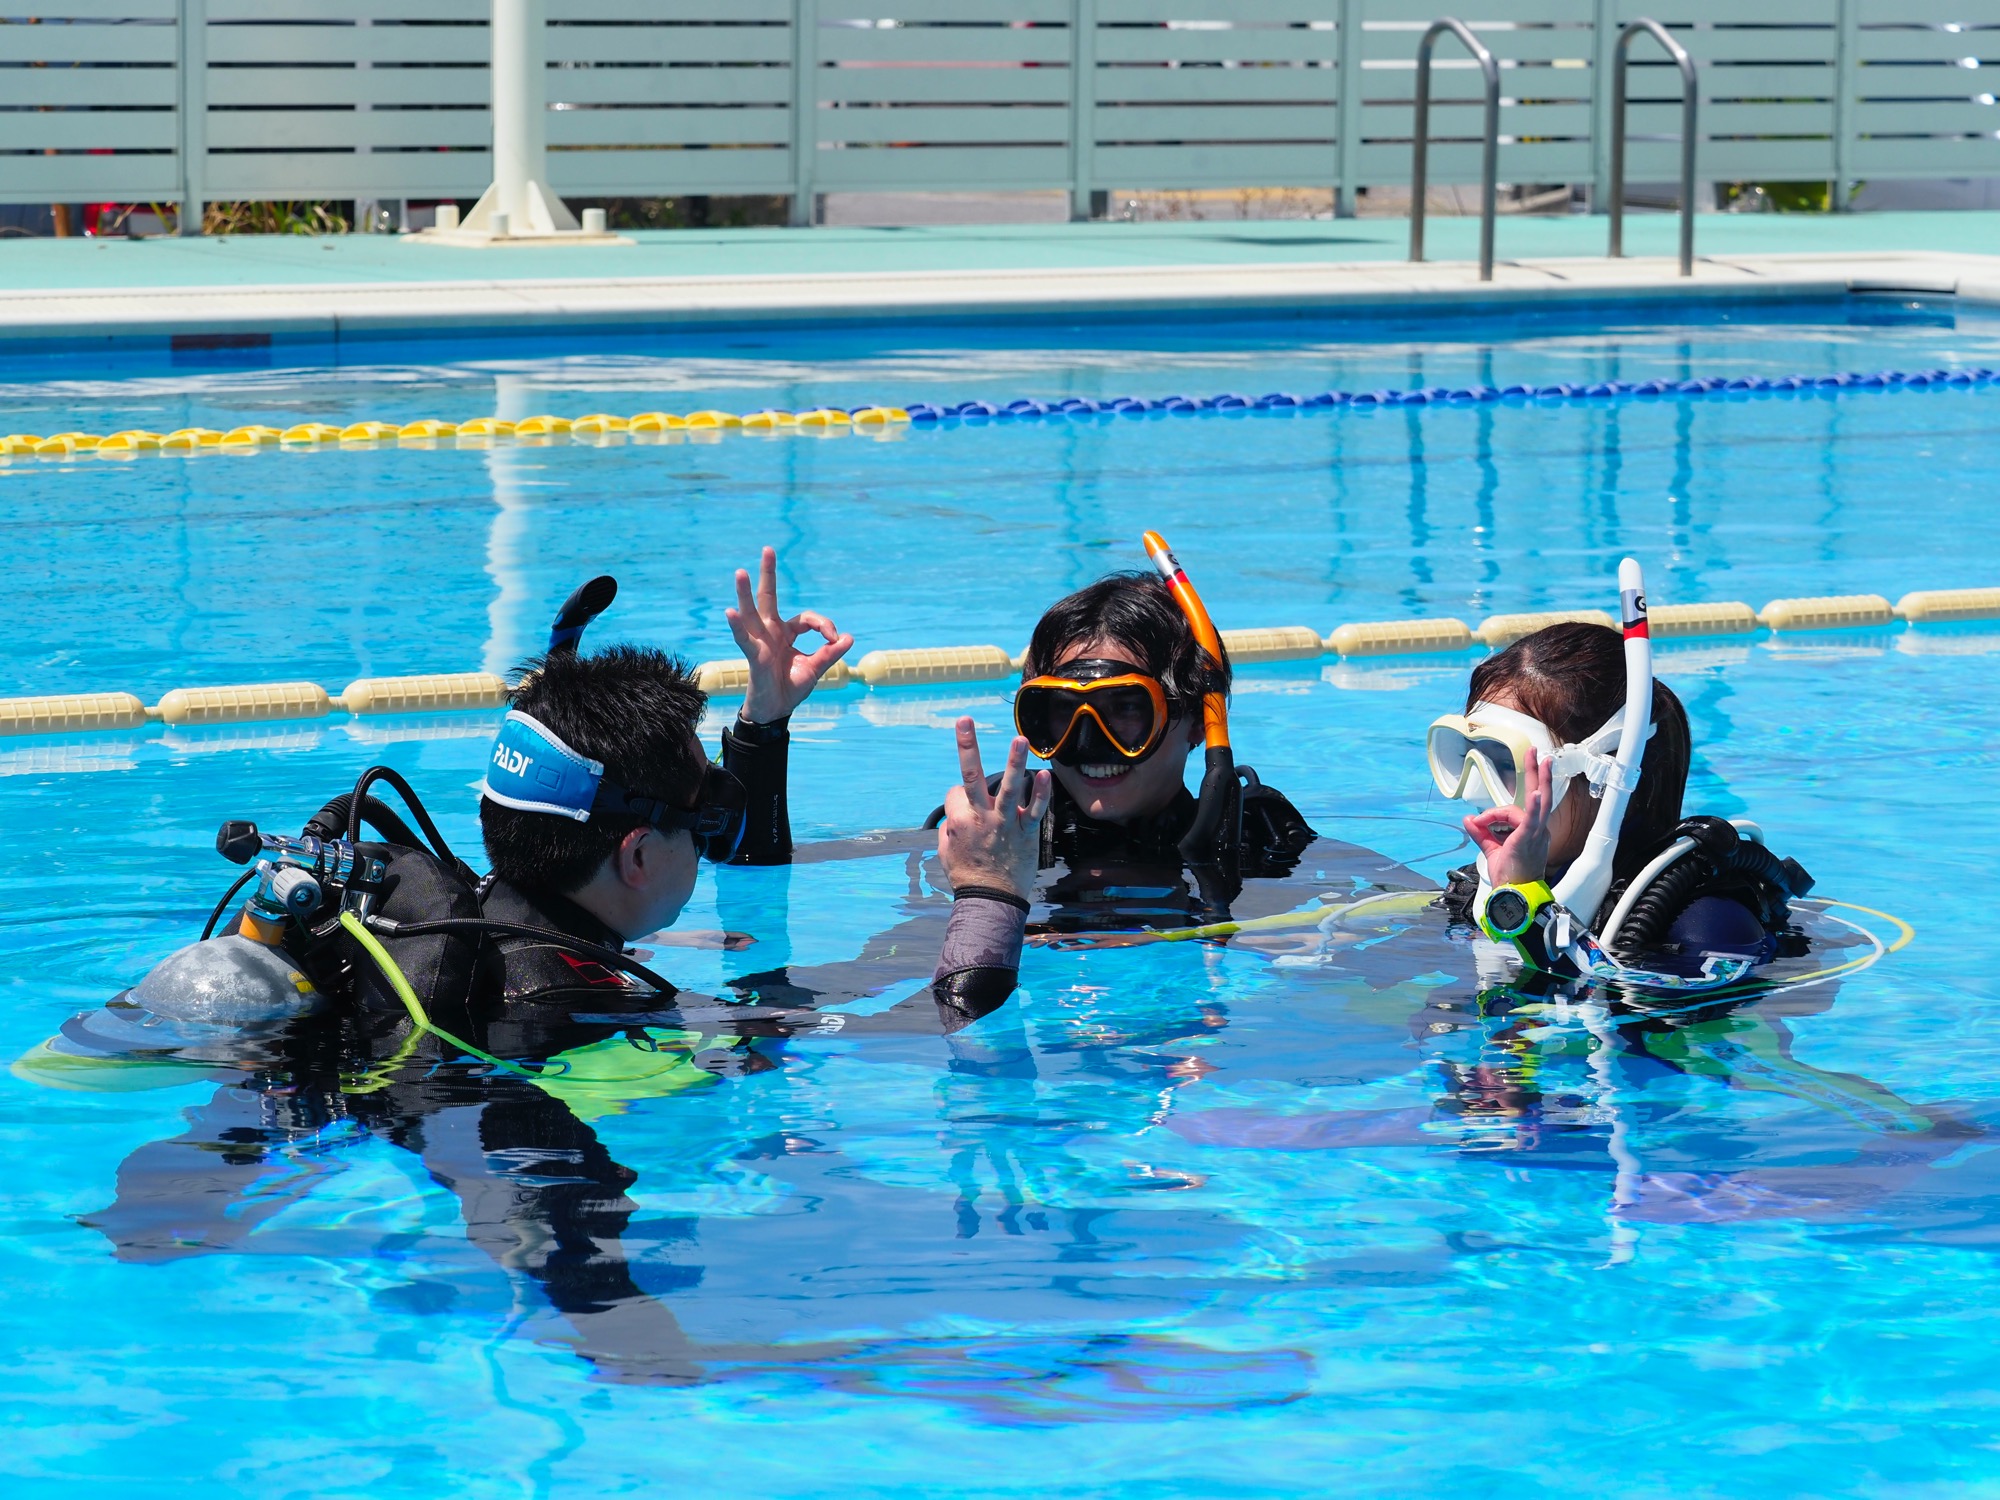 A group of PADI Open Water Diver students learning scuba skills in confined water along with the support of a PADI Divemaster